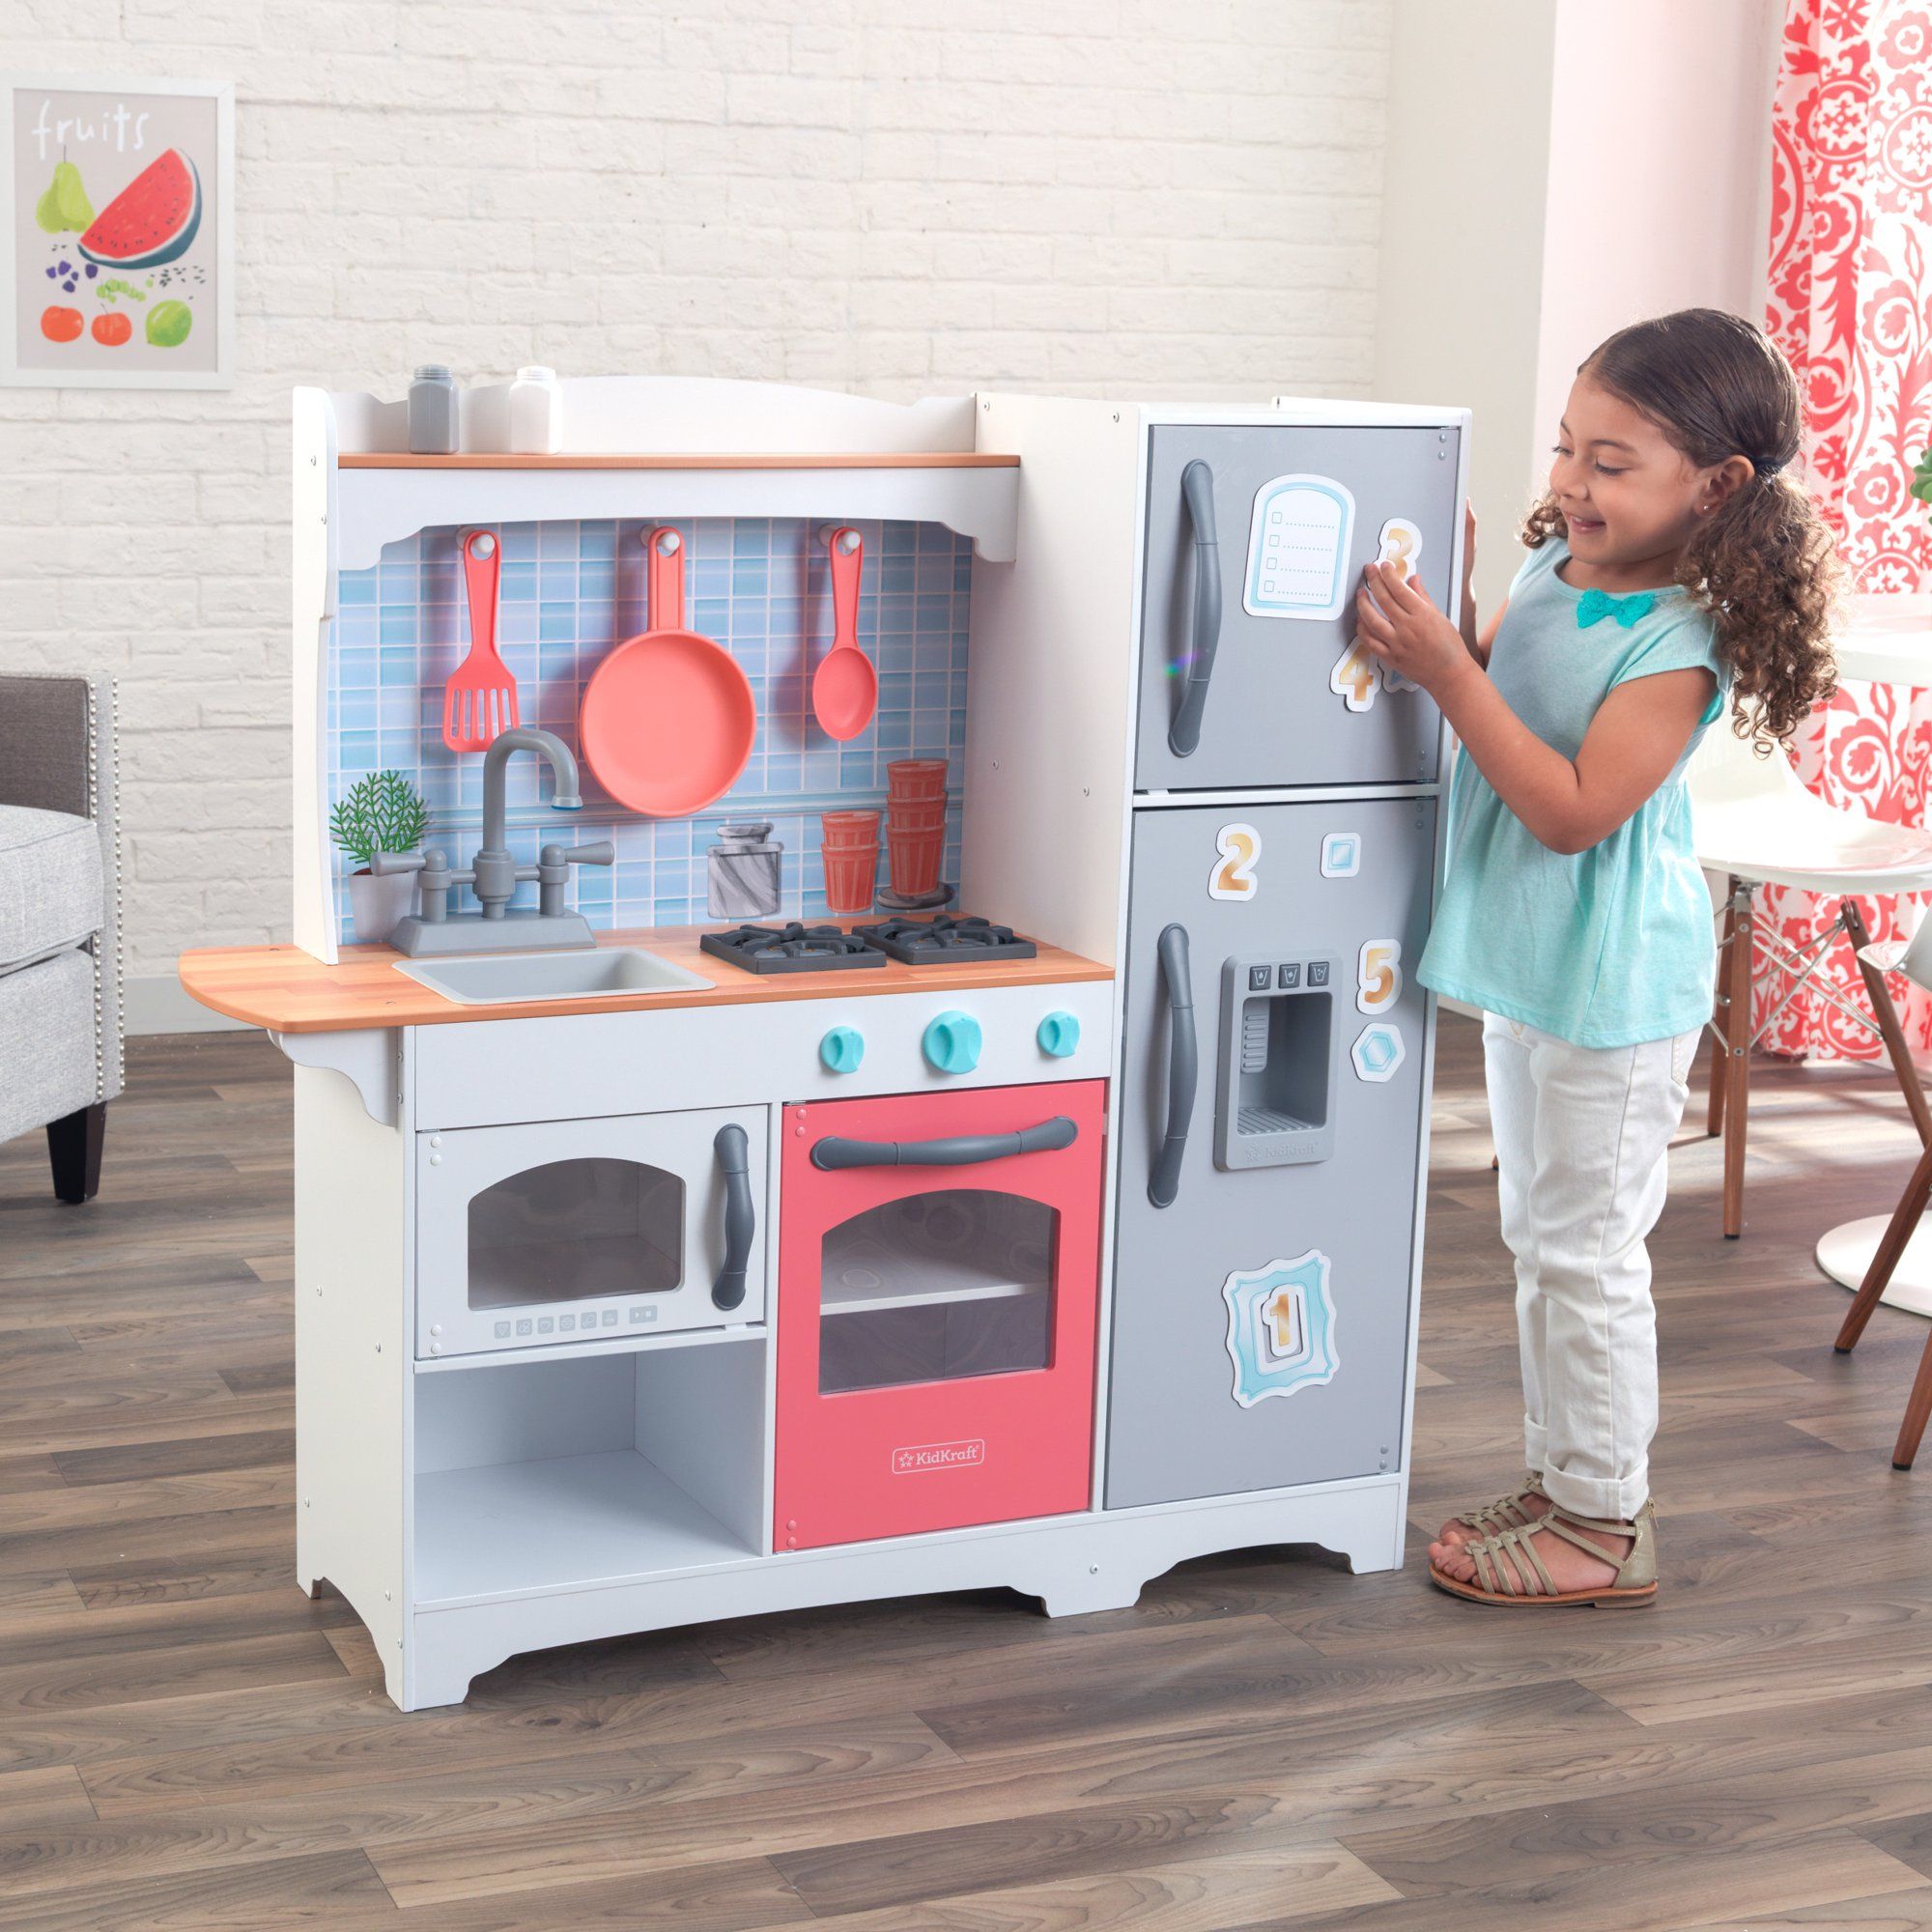 KidKraft Mosaic Magnetic Play Kitchen with EZ Kraft Assembly™ - Coral | Walmart (US)